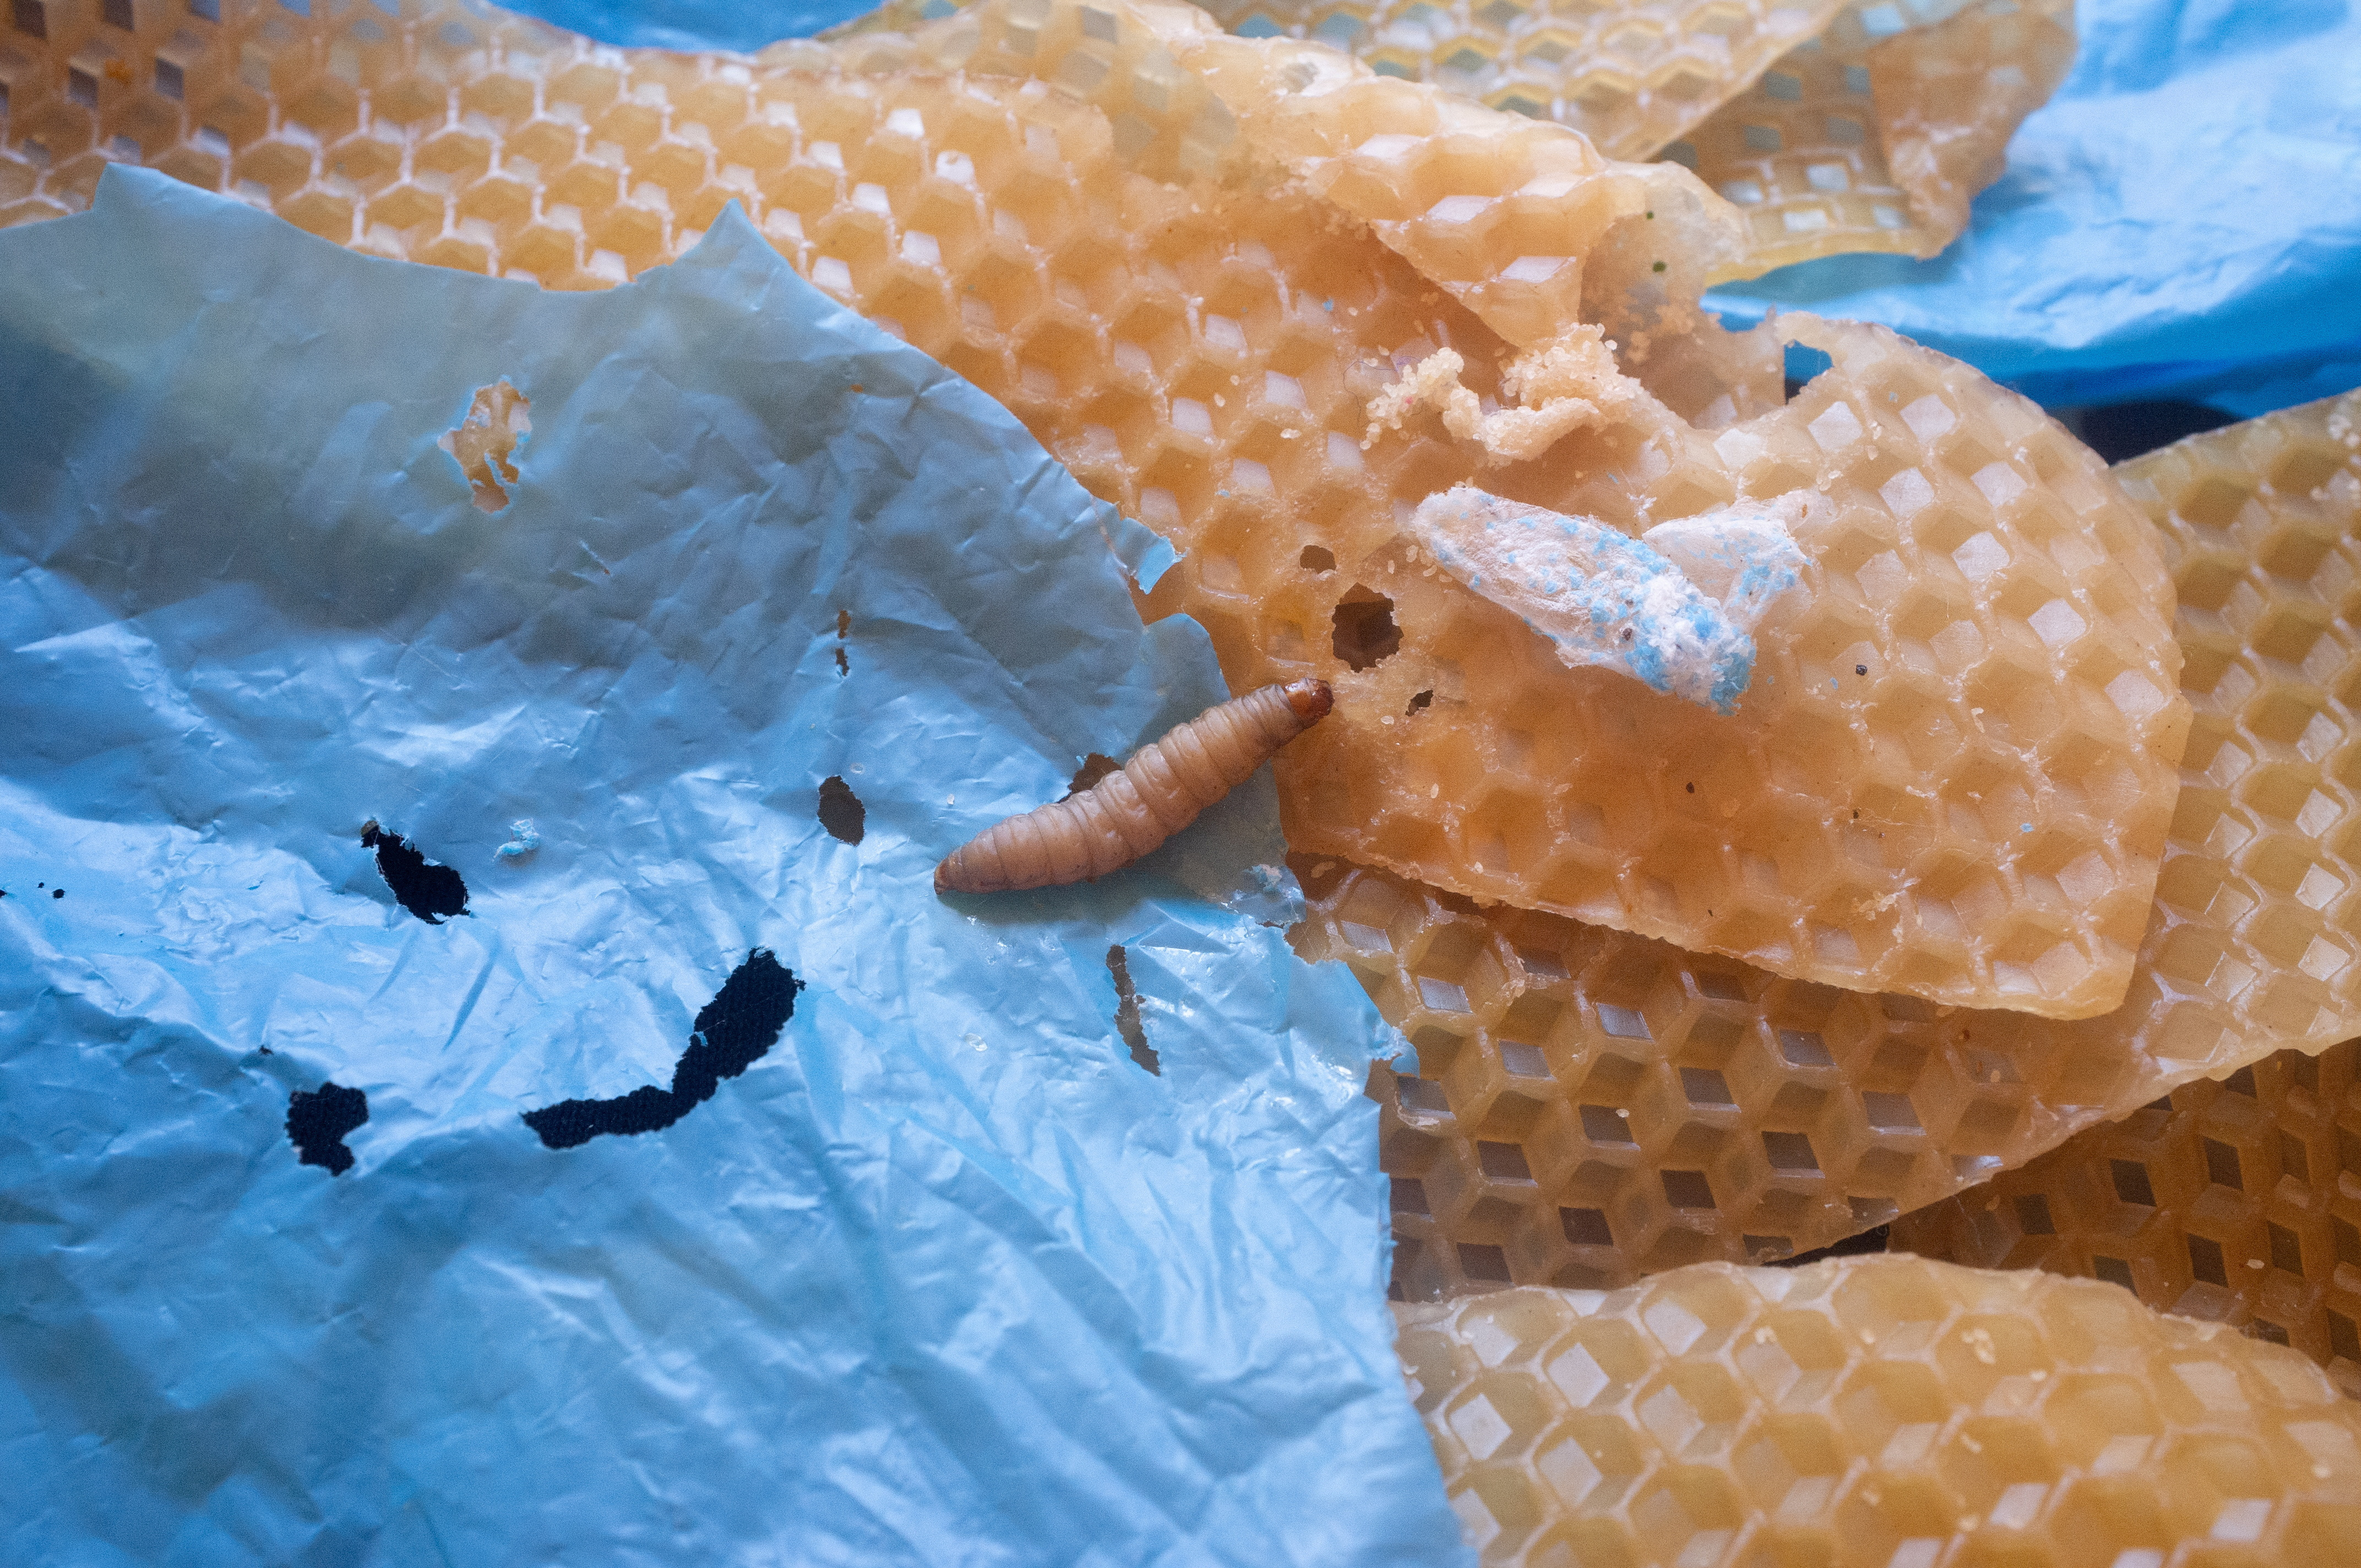 A wax worm, moth larva that eats wax made by bees to build honeycombs, is seen in a laboratory at the CSIC in Madrid